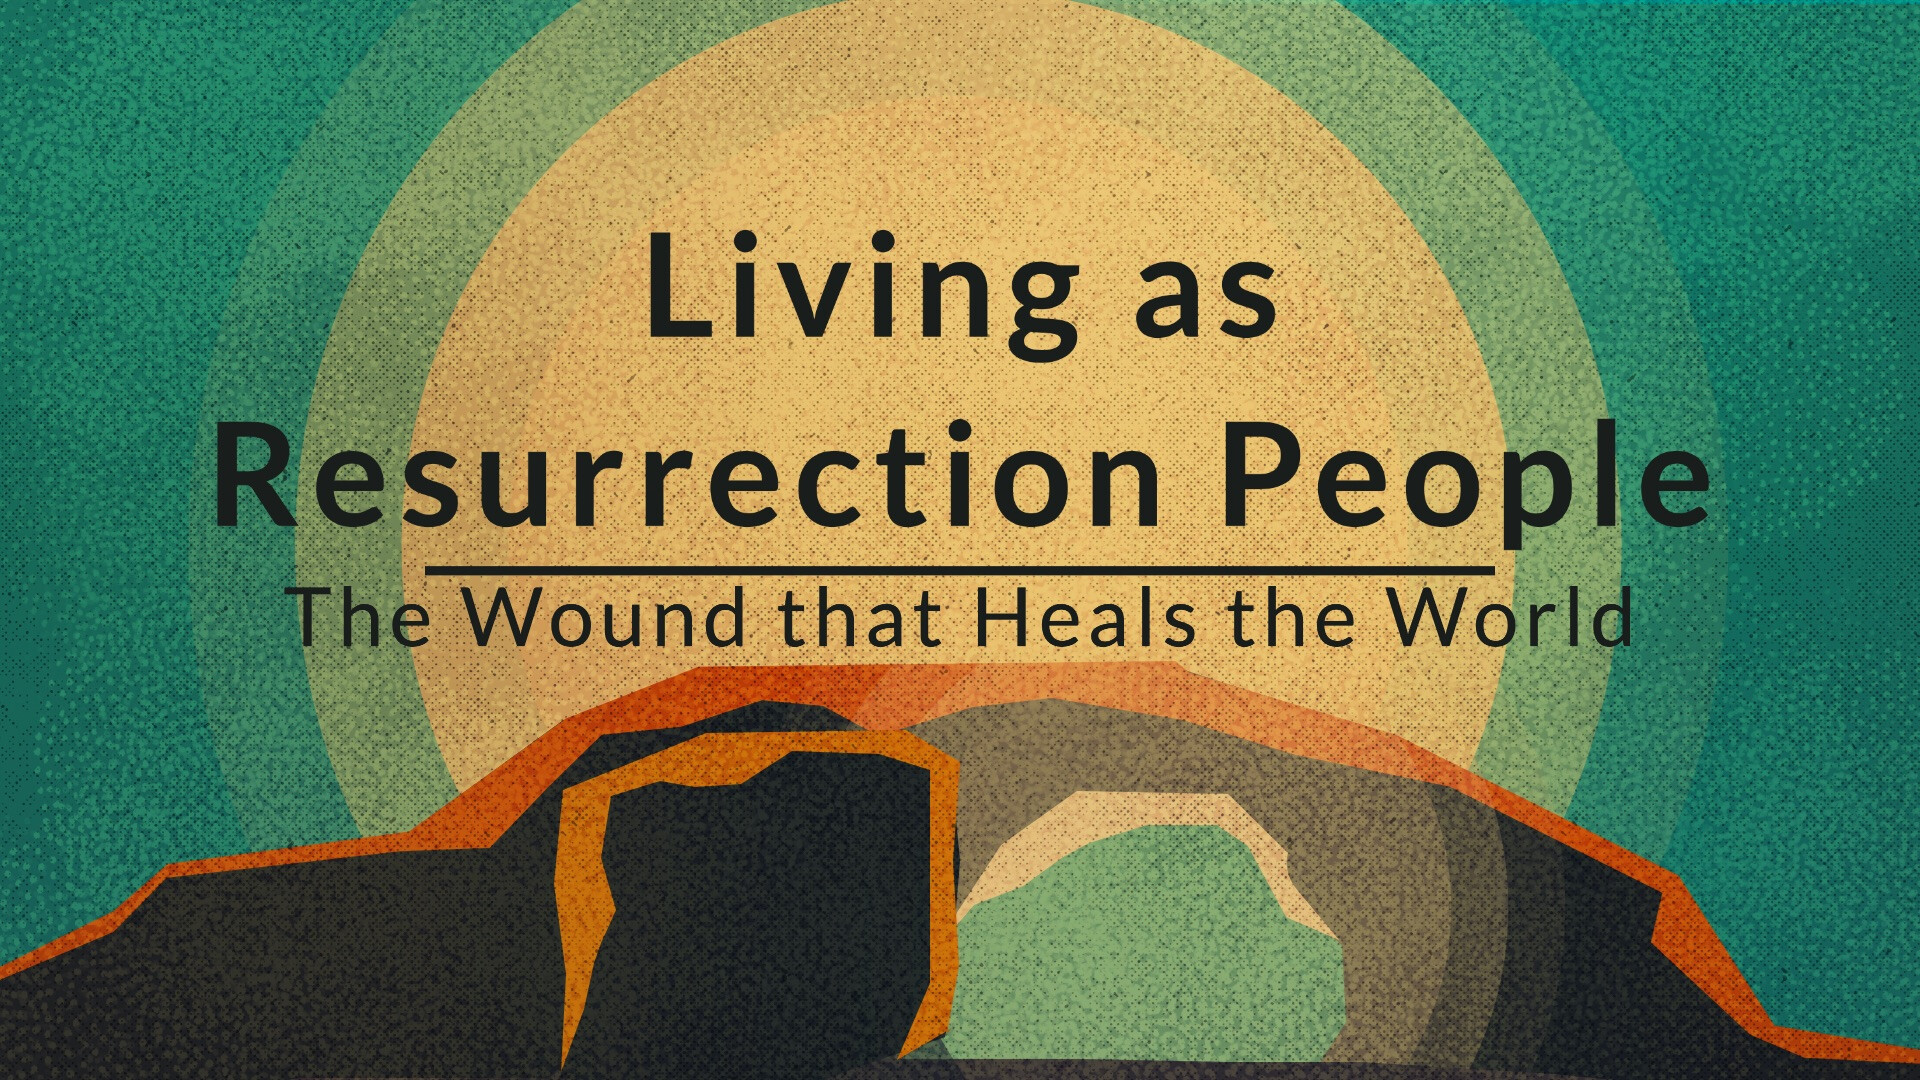 Living as Resurrection People: The Wound that Heals the World